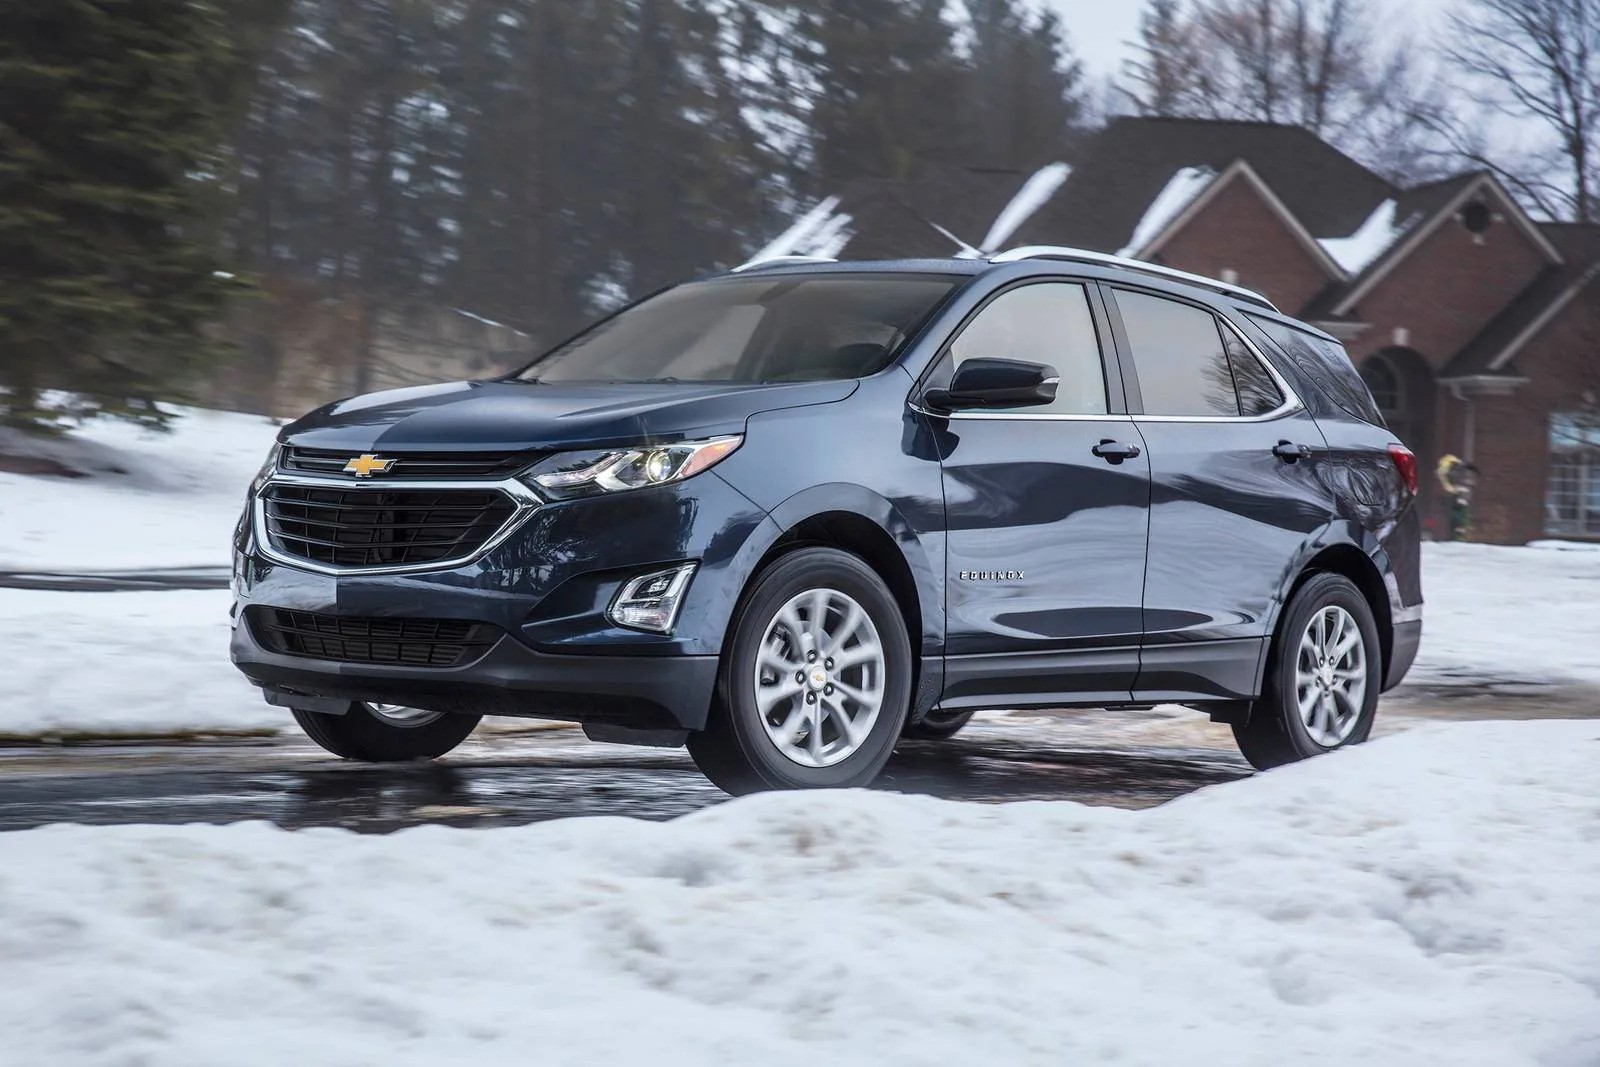 Chevy Equinox Safety Rating